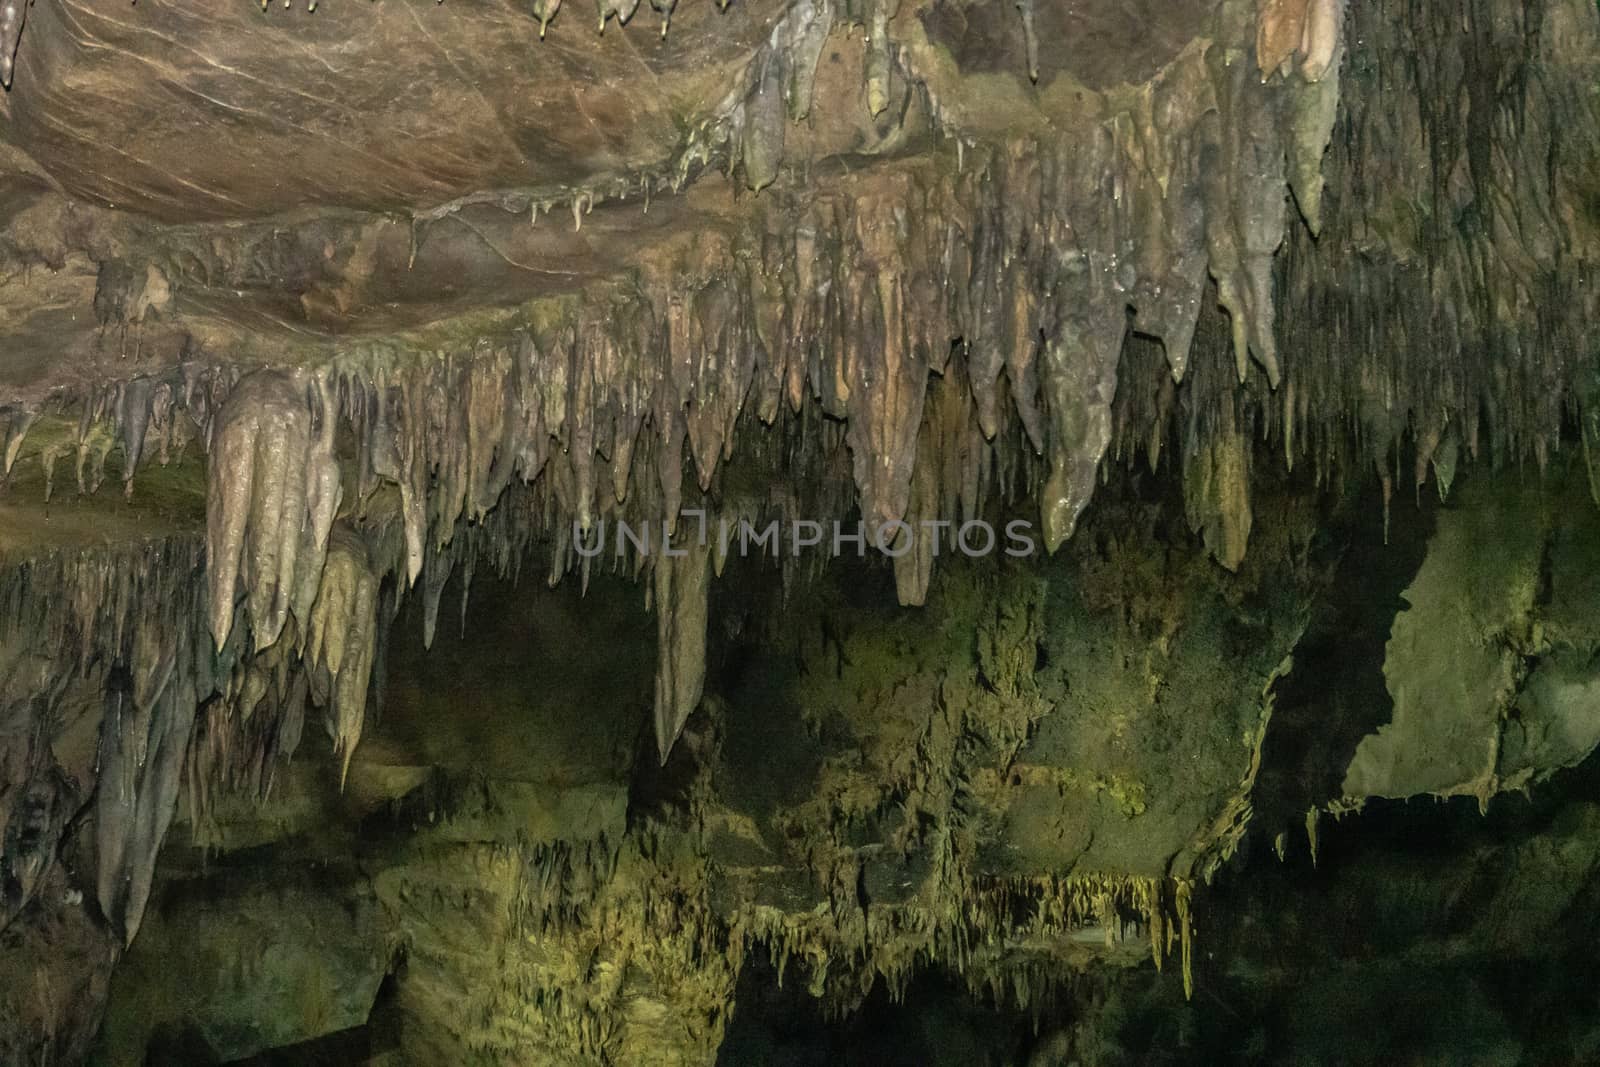 Han-sur-Lesse, Belgium - June 25, 2019: Grottes-de-Han 35 of 36. subterranean pictures of Stalagmites and stalactites in different shapes and colors throughout tunnels, caverns and large halls. Rock curtains.